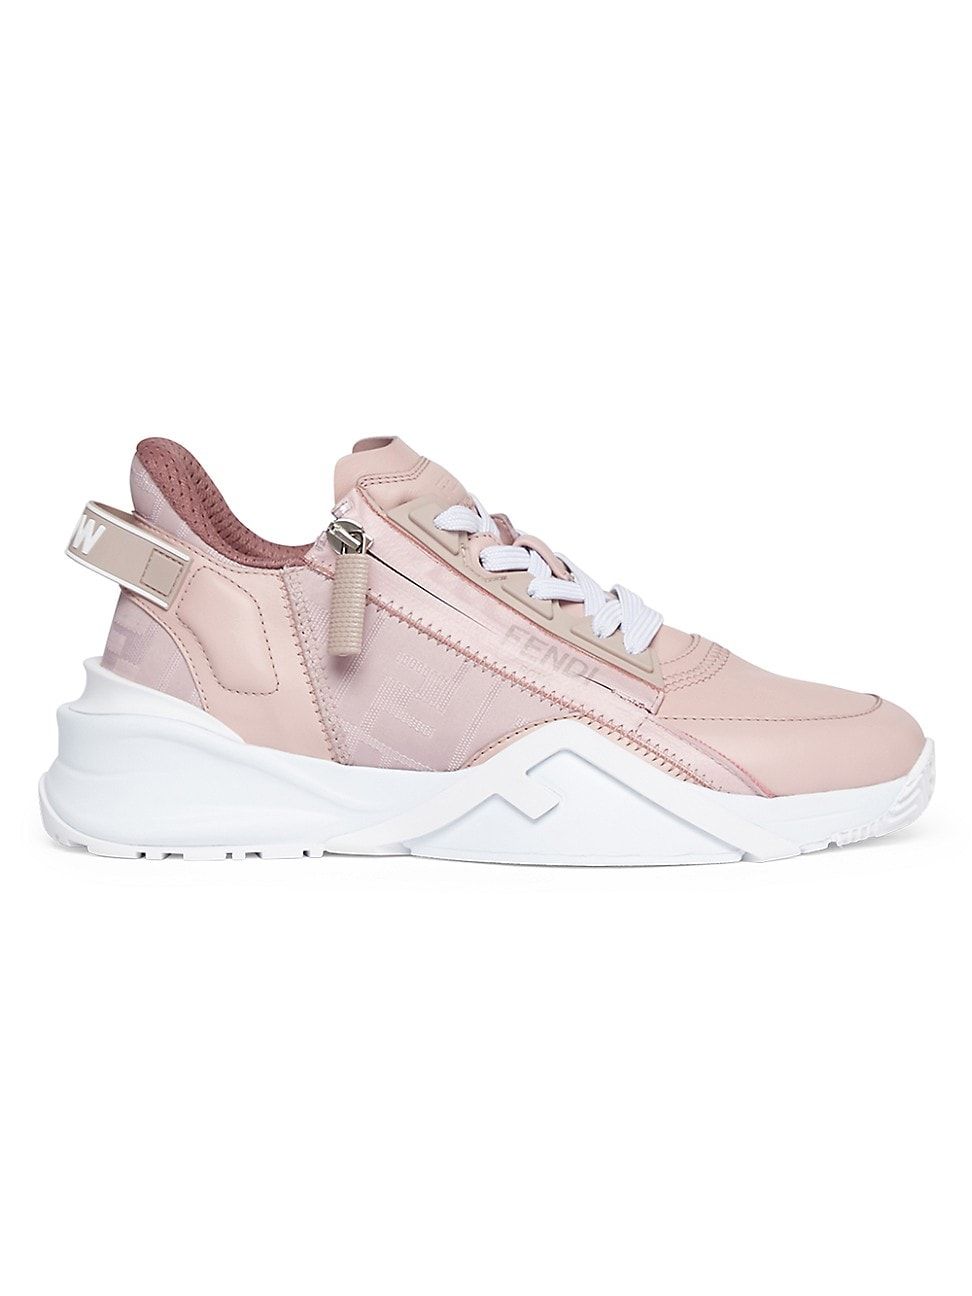 Women's Flow Leather Sneakers - Pink - Size 9 - Pink - Size 9 | Saks Fifth Avenue